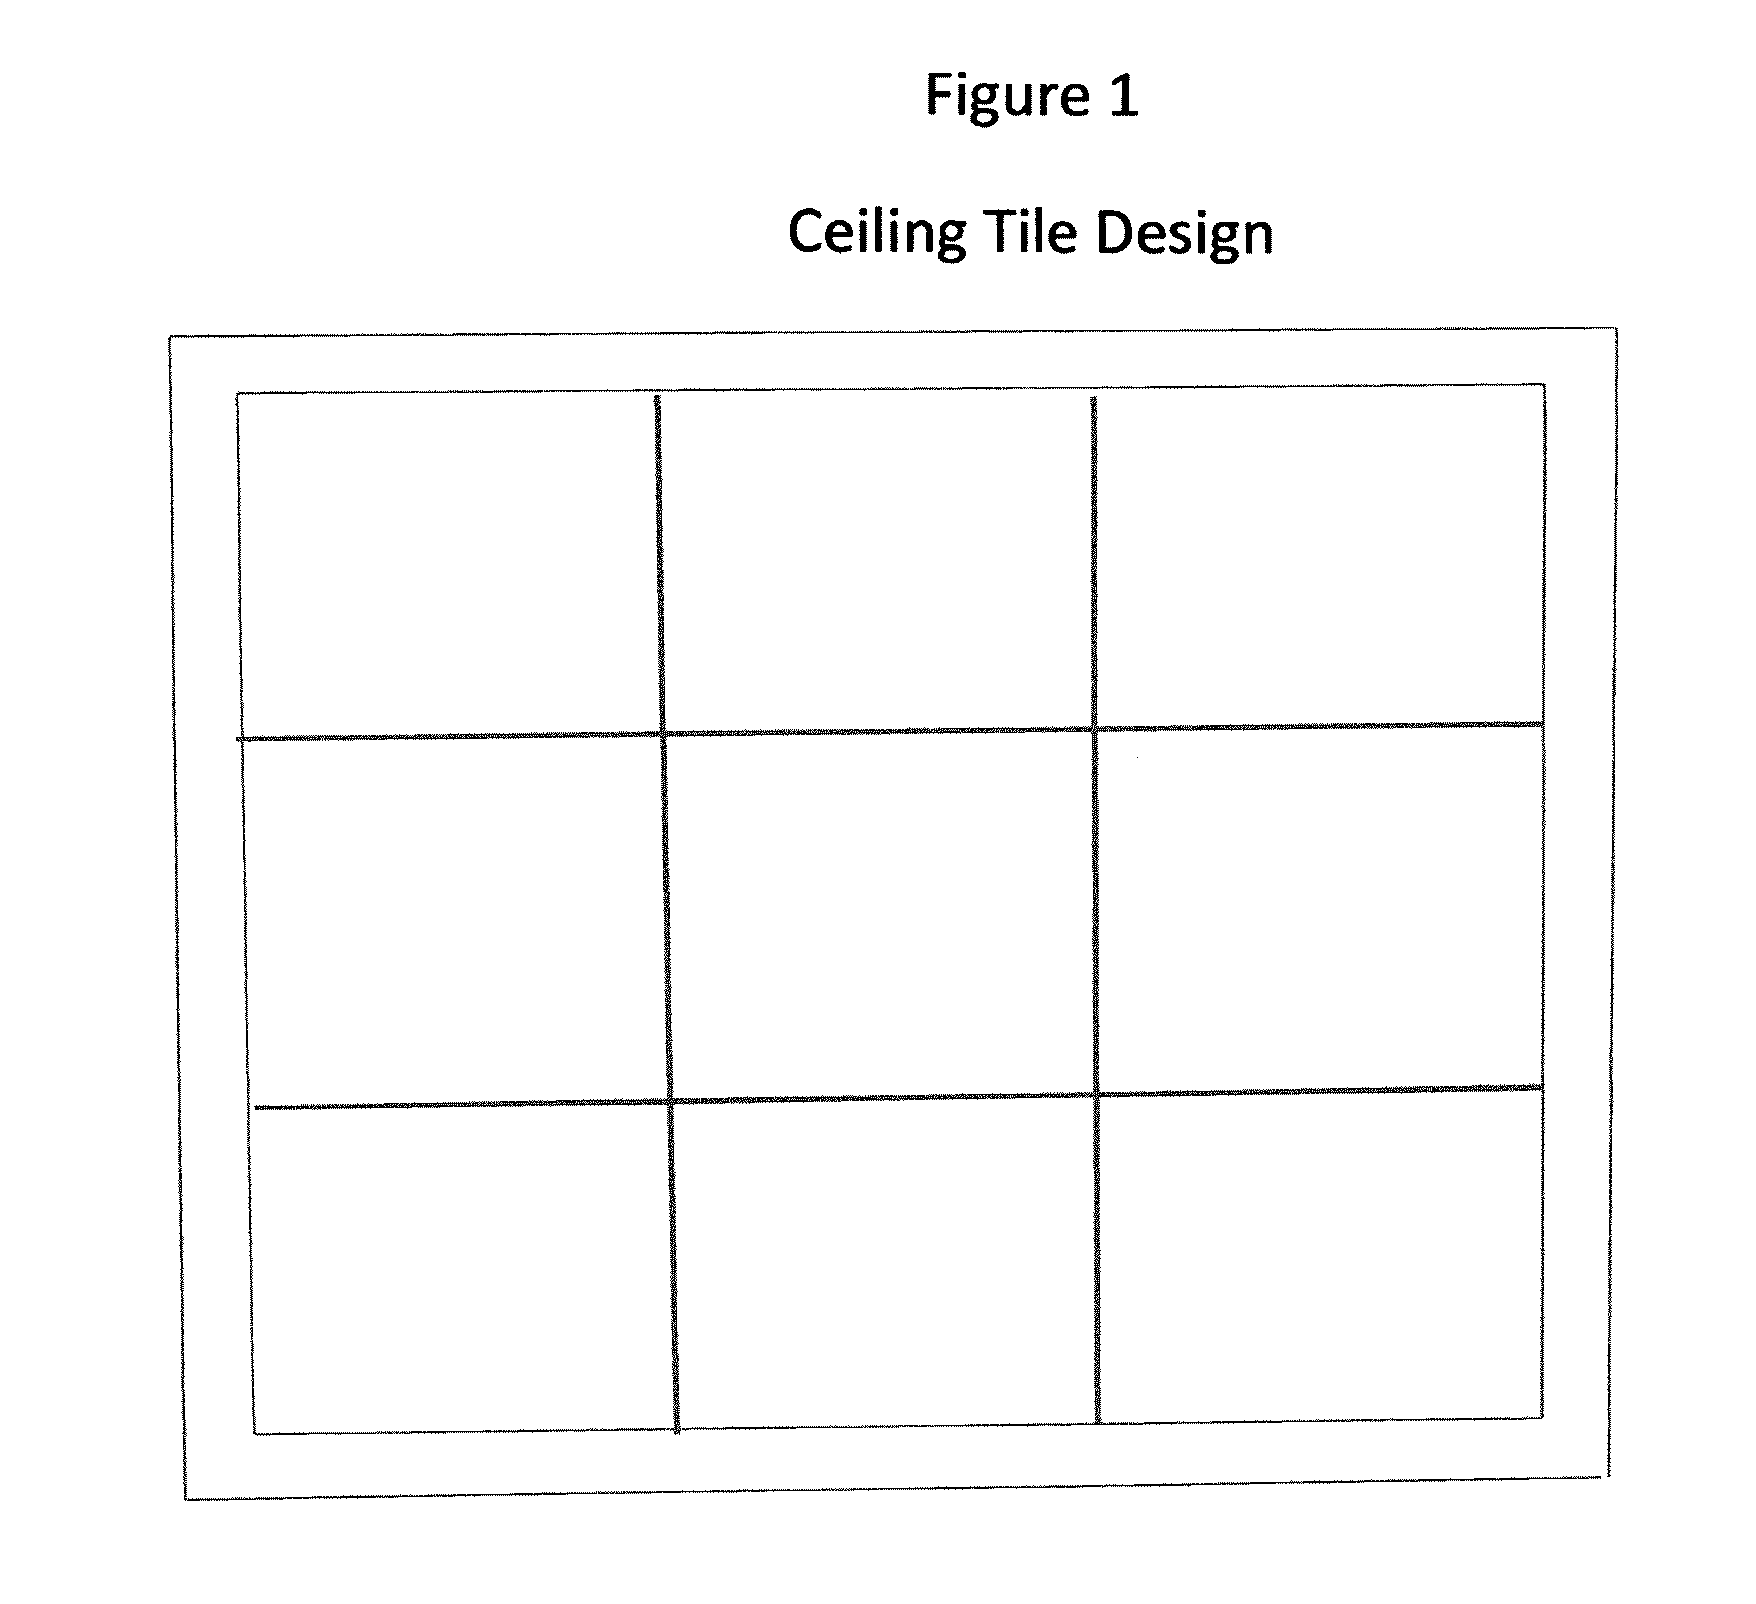 Apparatus and method of making a nonwoven ceiling tile and wall panel